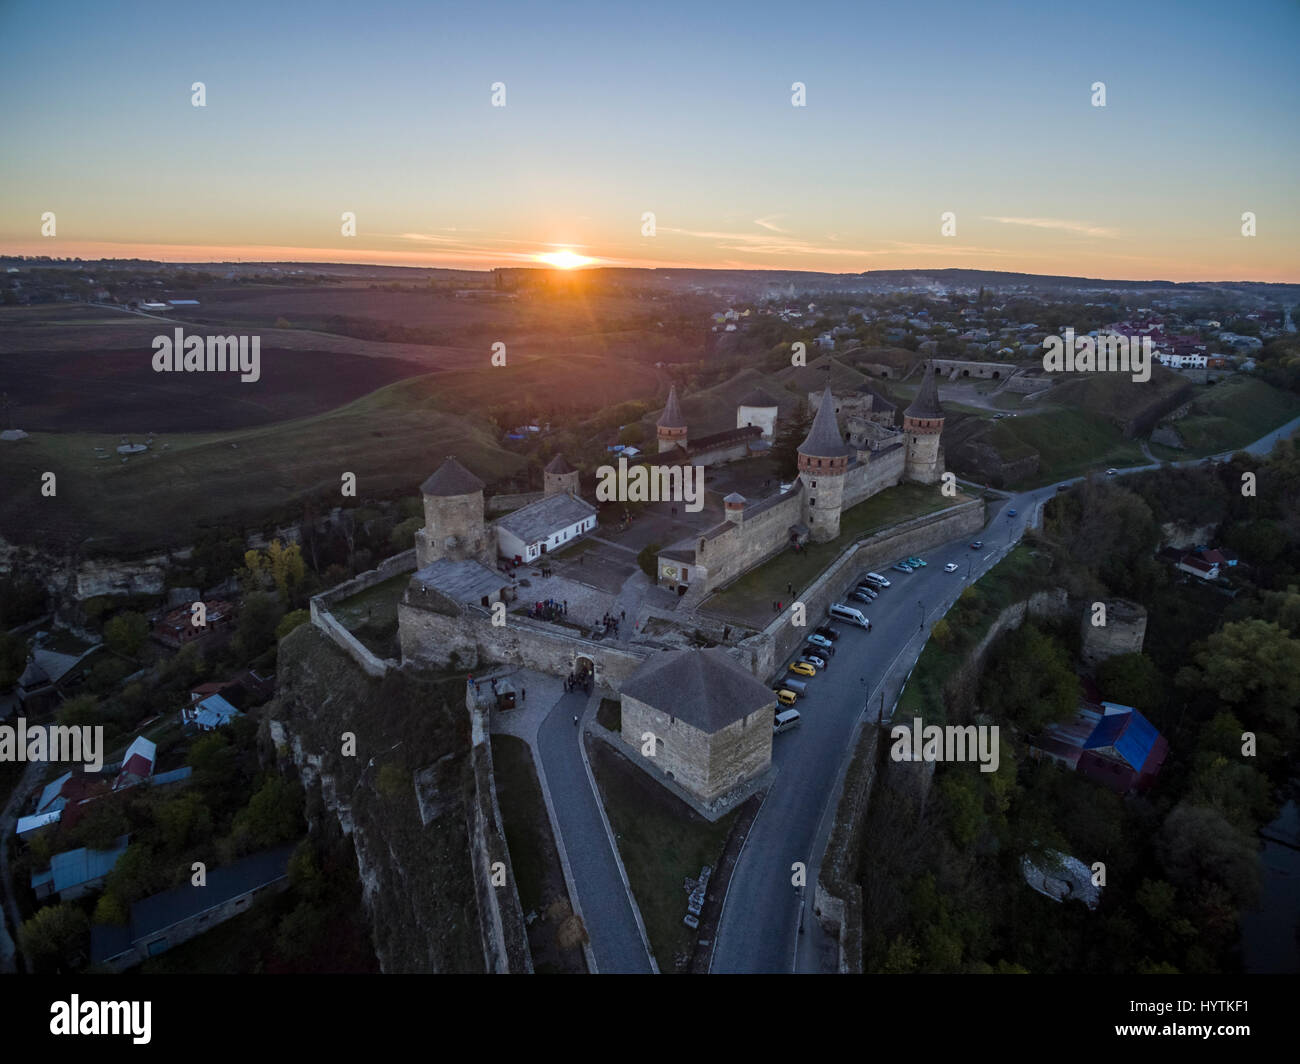 Aerial shot towards a sunset behind Kamianets-Podilskyi castle in Western Ukraine. Taken on a clear autumn evening Stock Photo